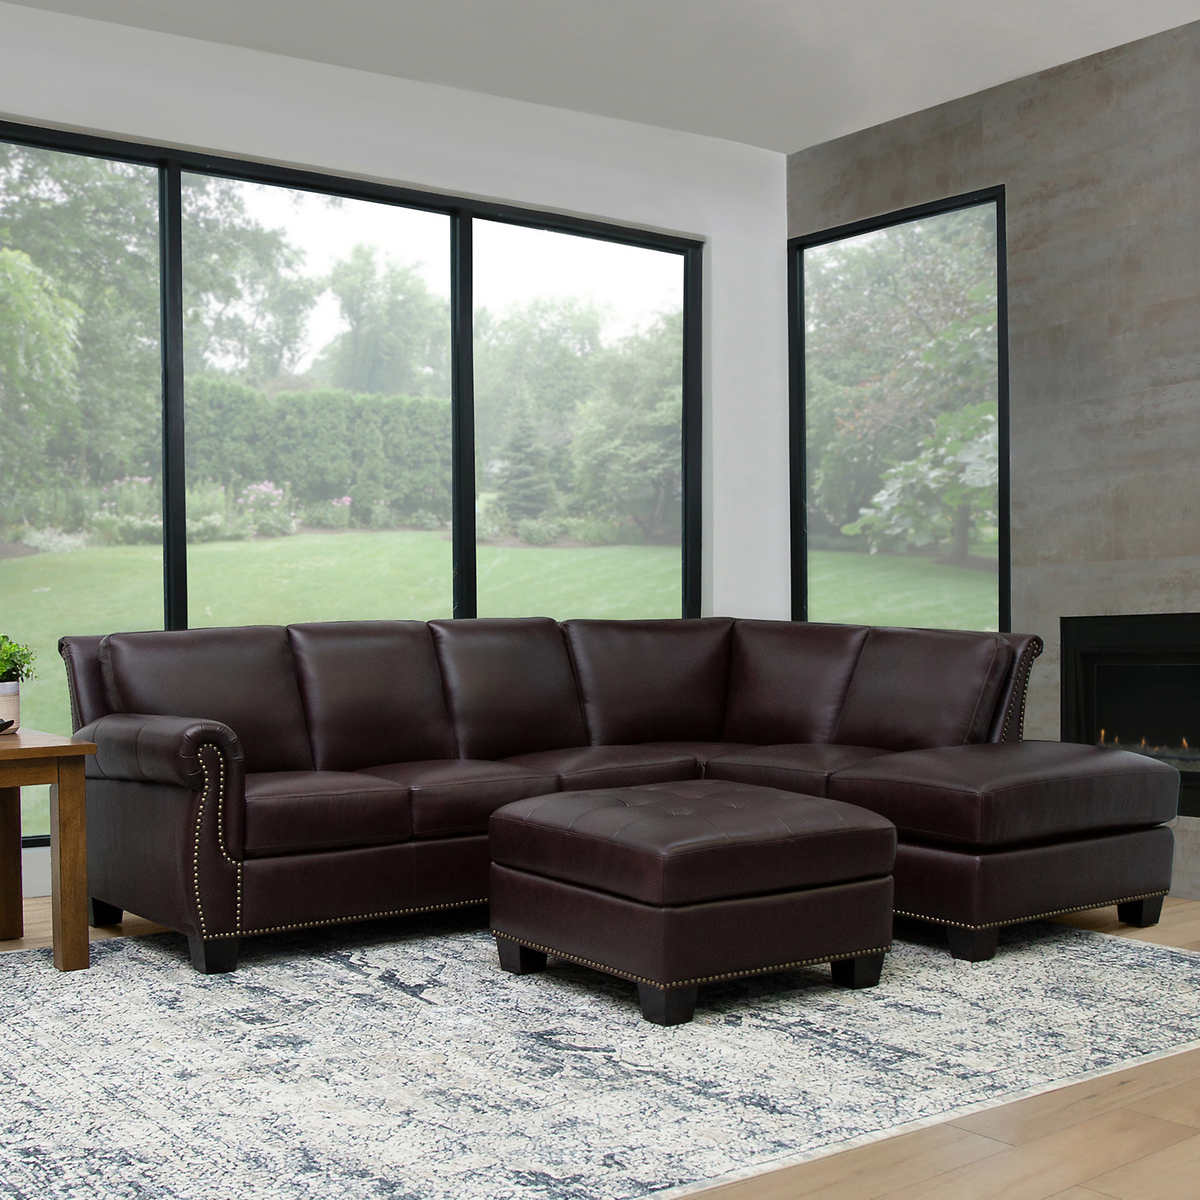 Encore Leather Sectional And Ottoman, Living Room With Leather Sectional